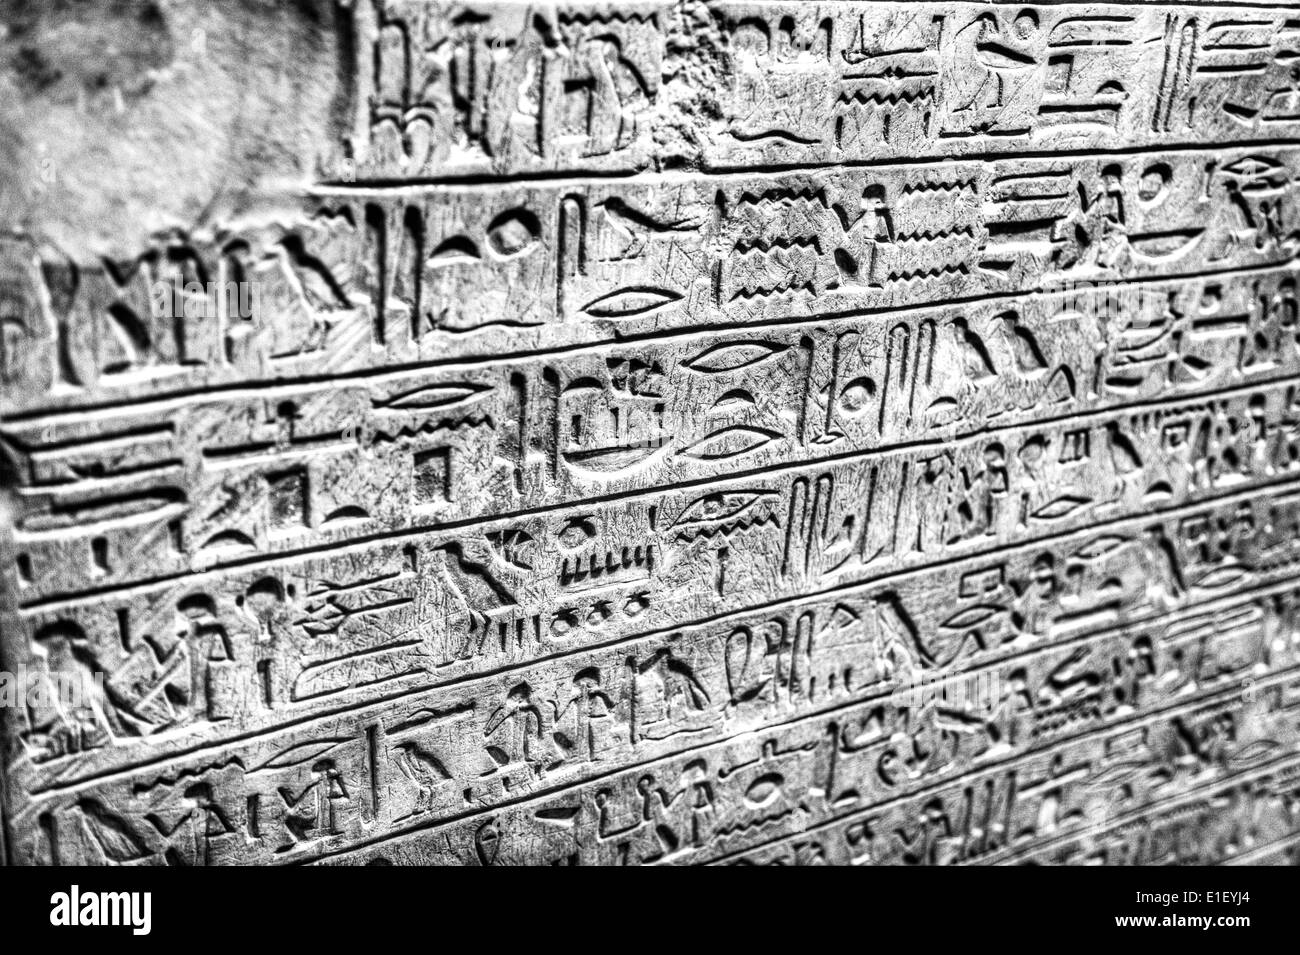 egyptian hieroglyphics carvings, egypt, egyptian, ancient, hieroglyphic, hieroglyphics, language, letter, lettering, root, roots Stock Photo